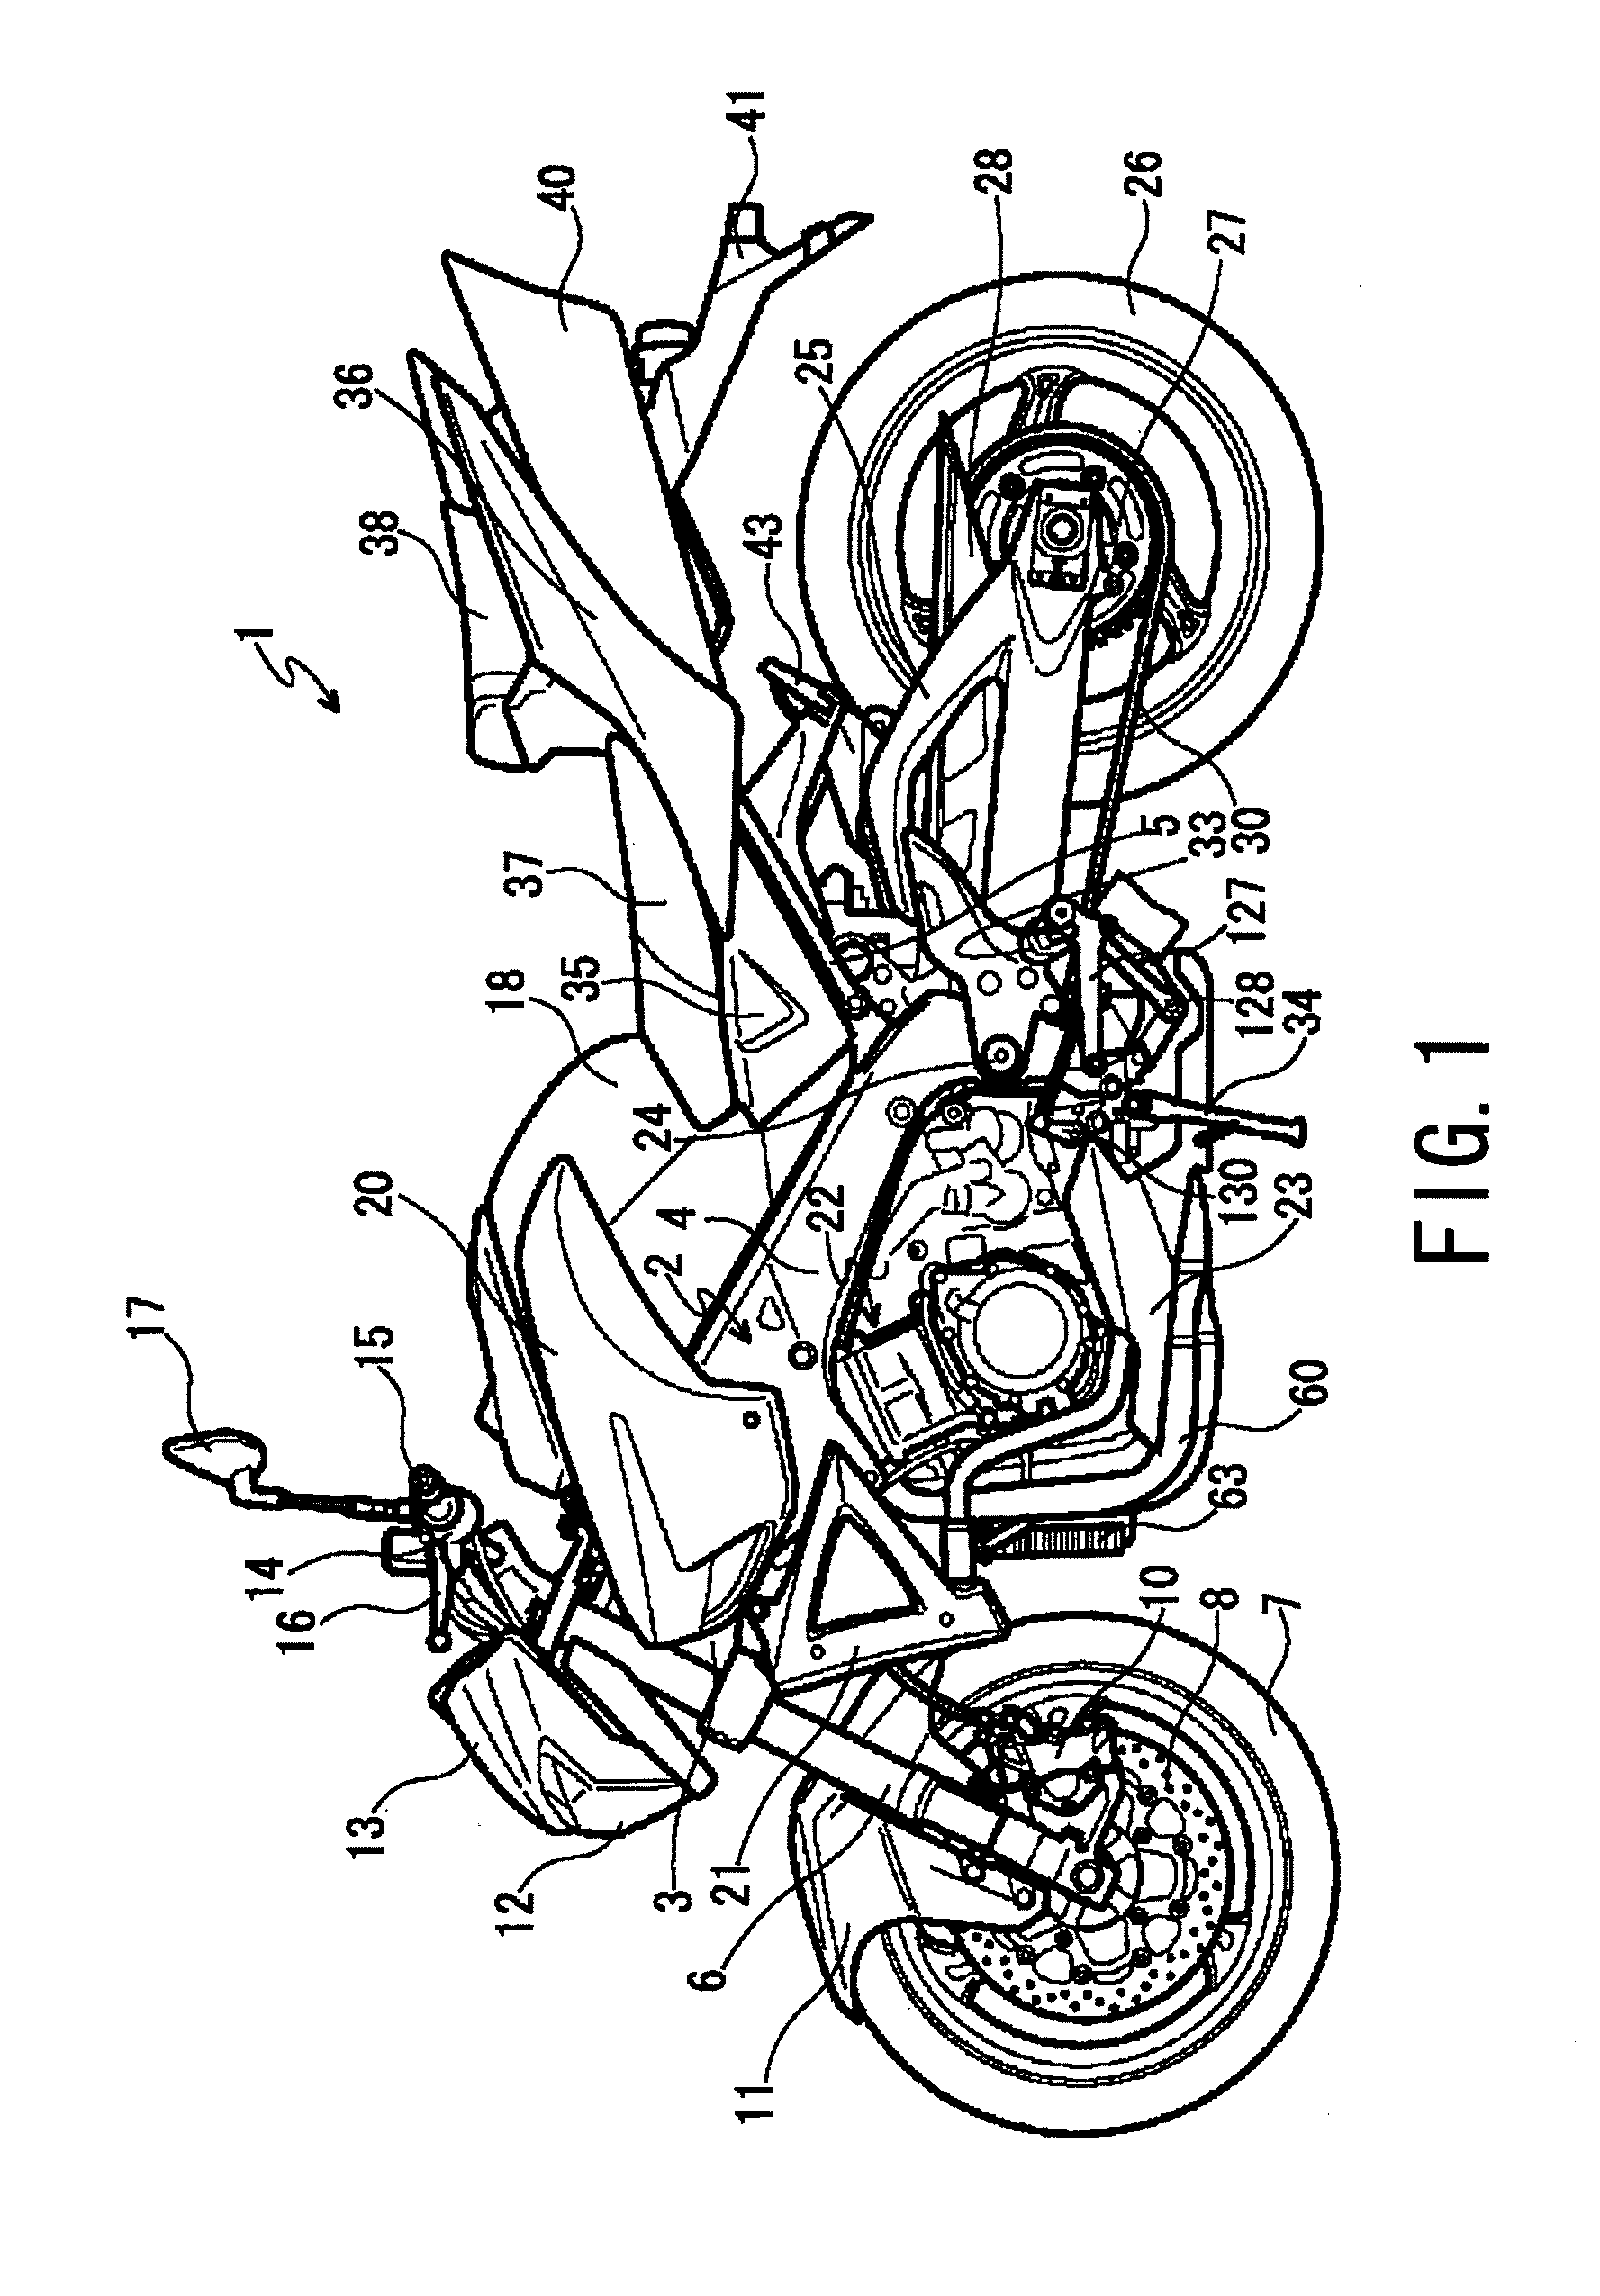 Transmission of motorcycle